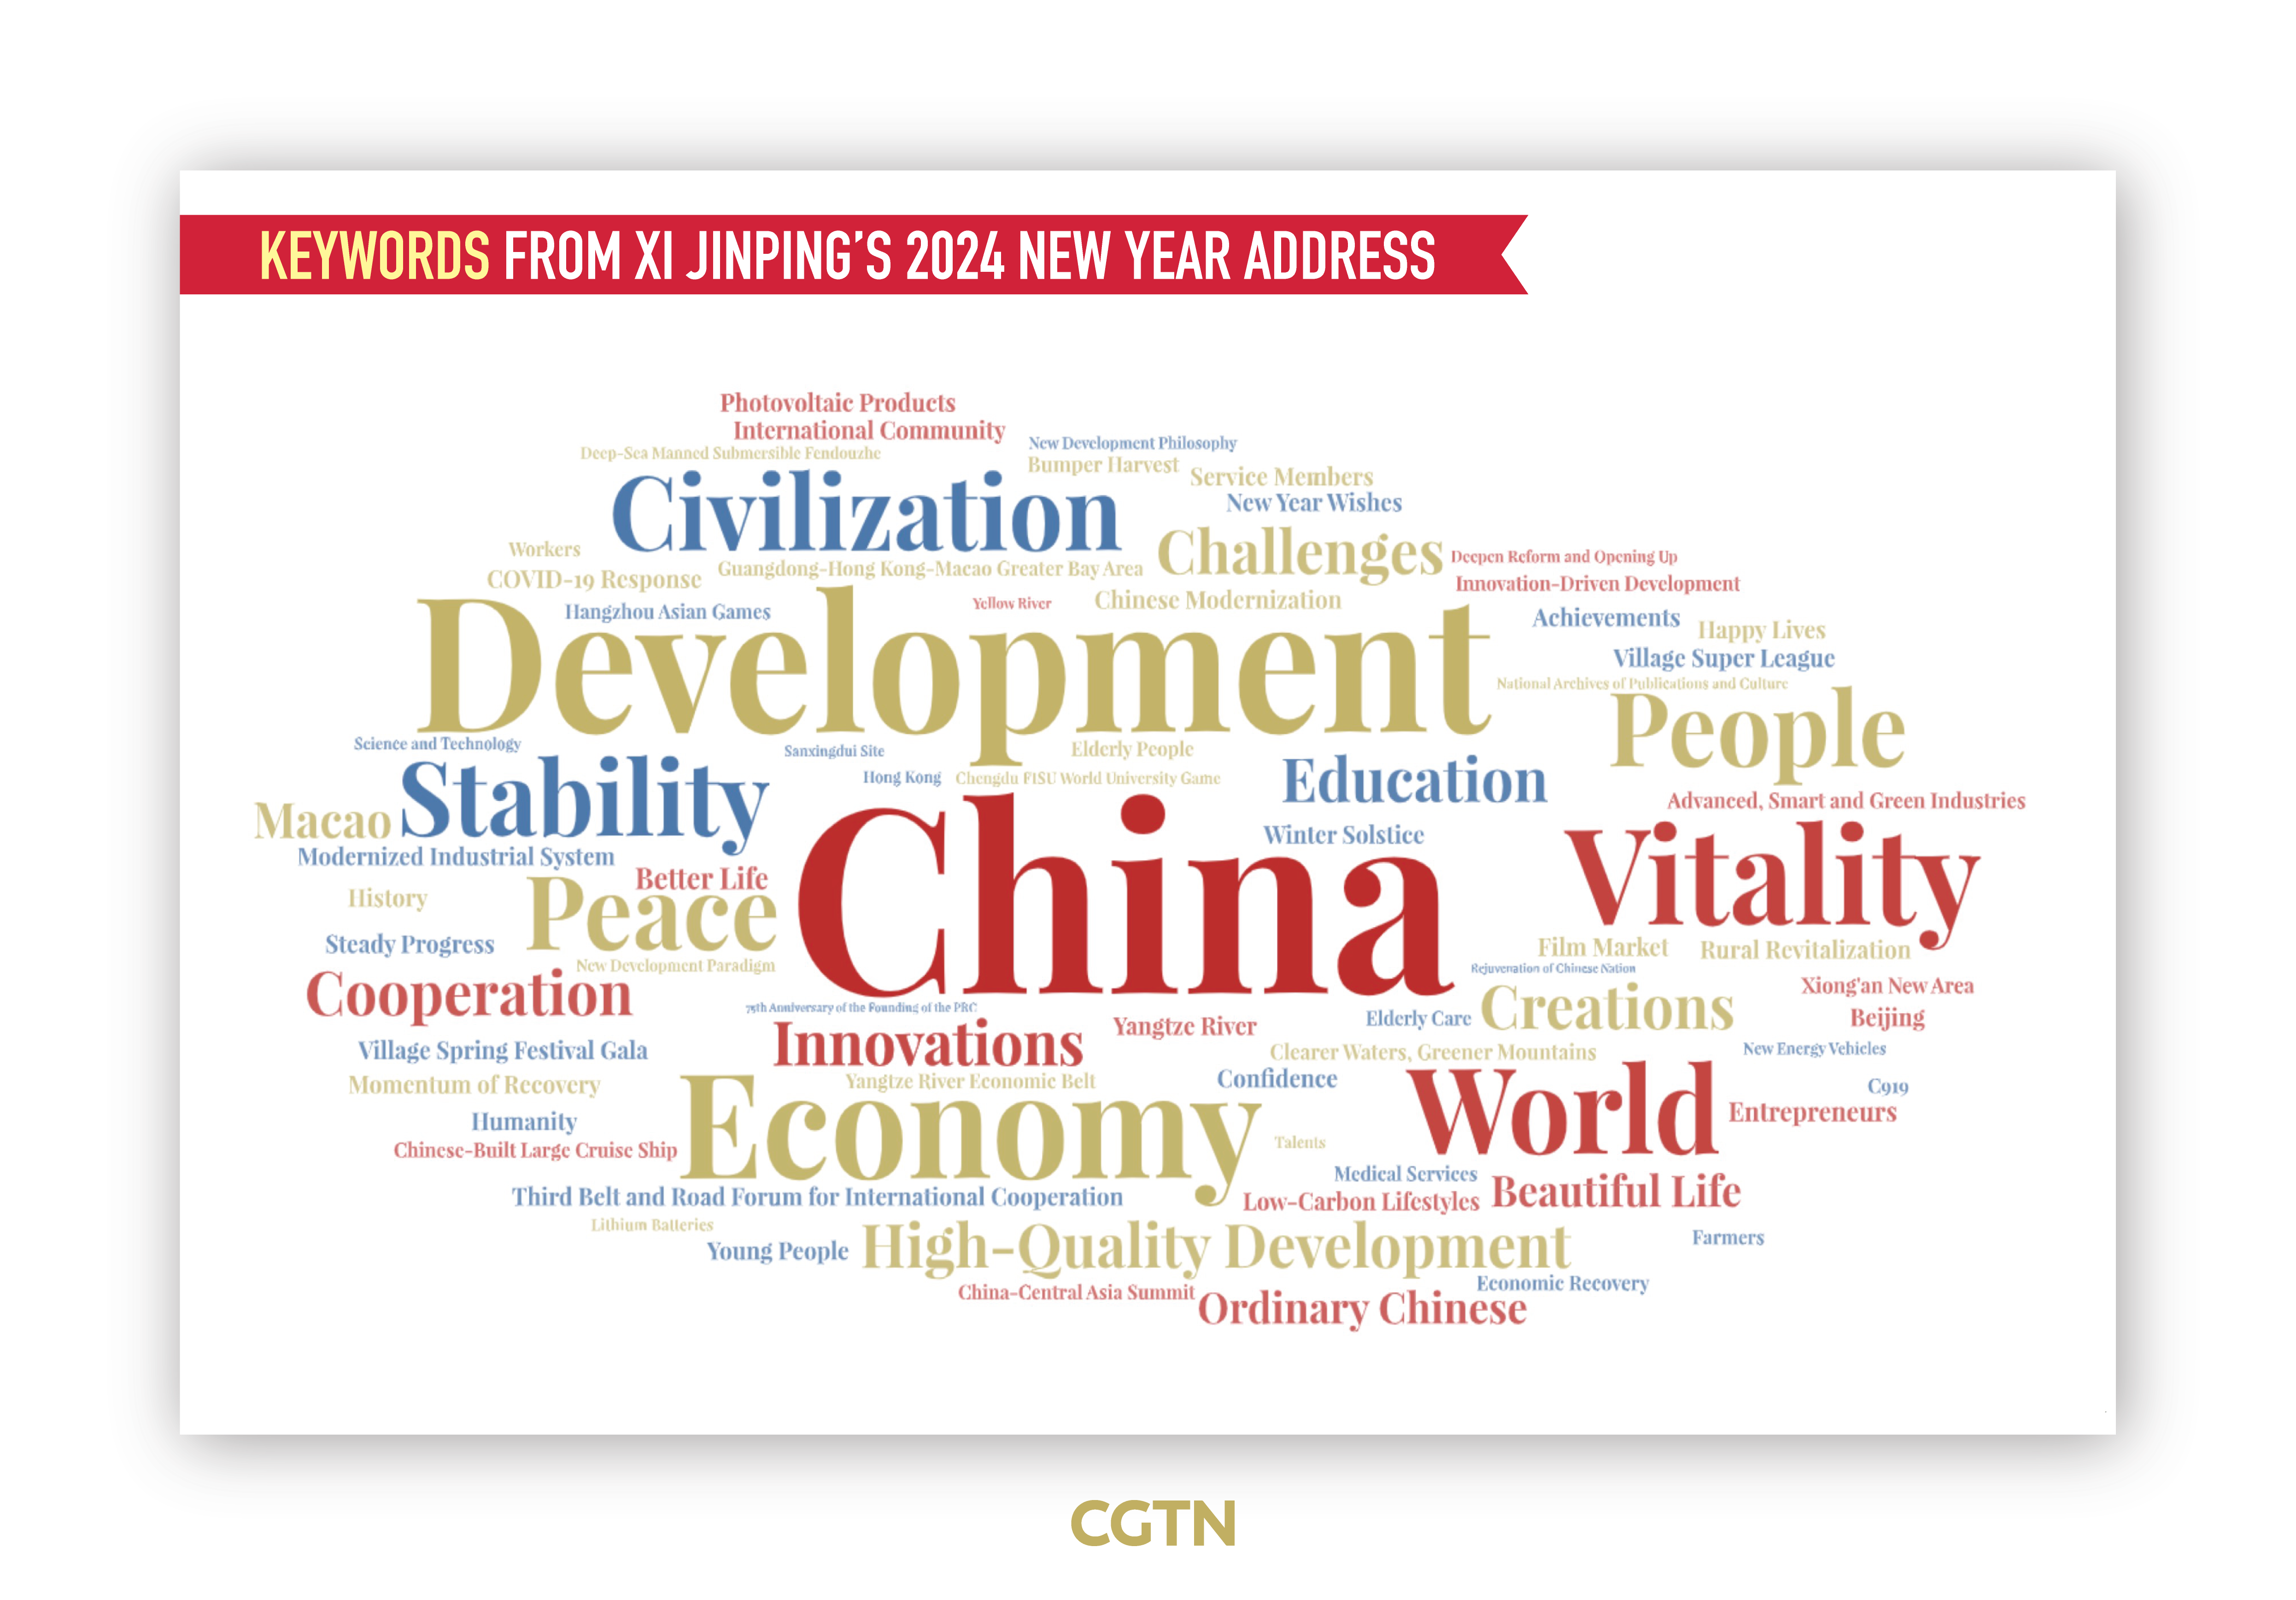 Graphics: Key points from Xi Jinping's 2024 New Year address